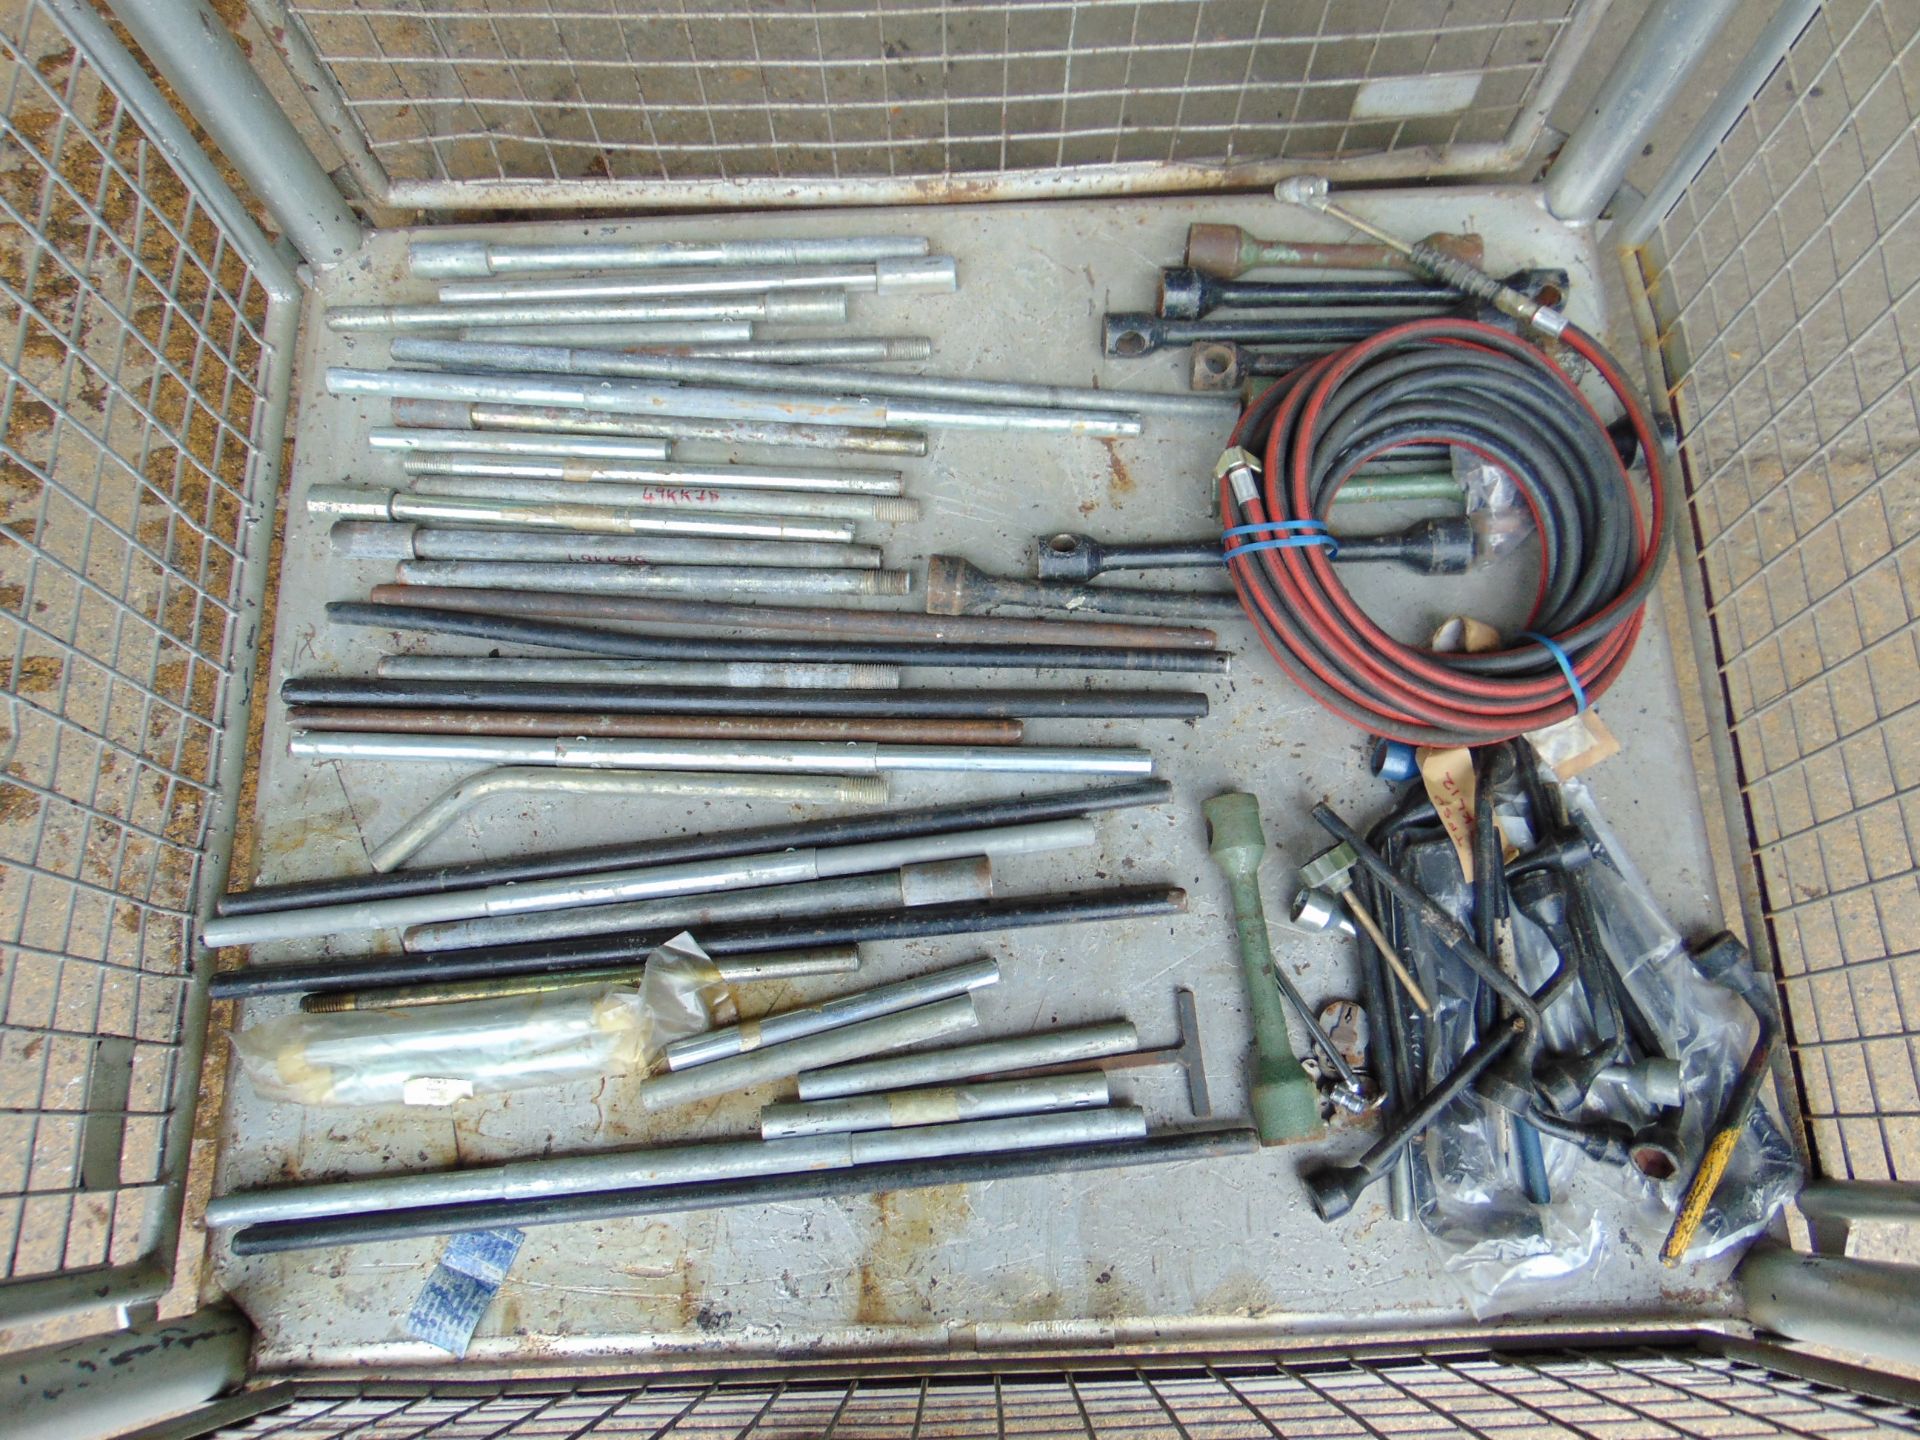 1 x Stillage Assortment of Tools, Wheel Wrenches, Air Line Etc - Image 2 of 5